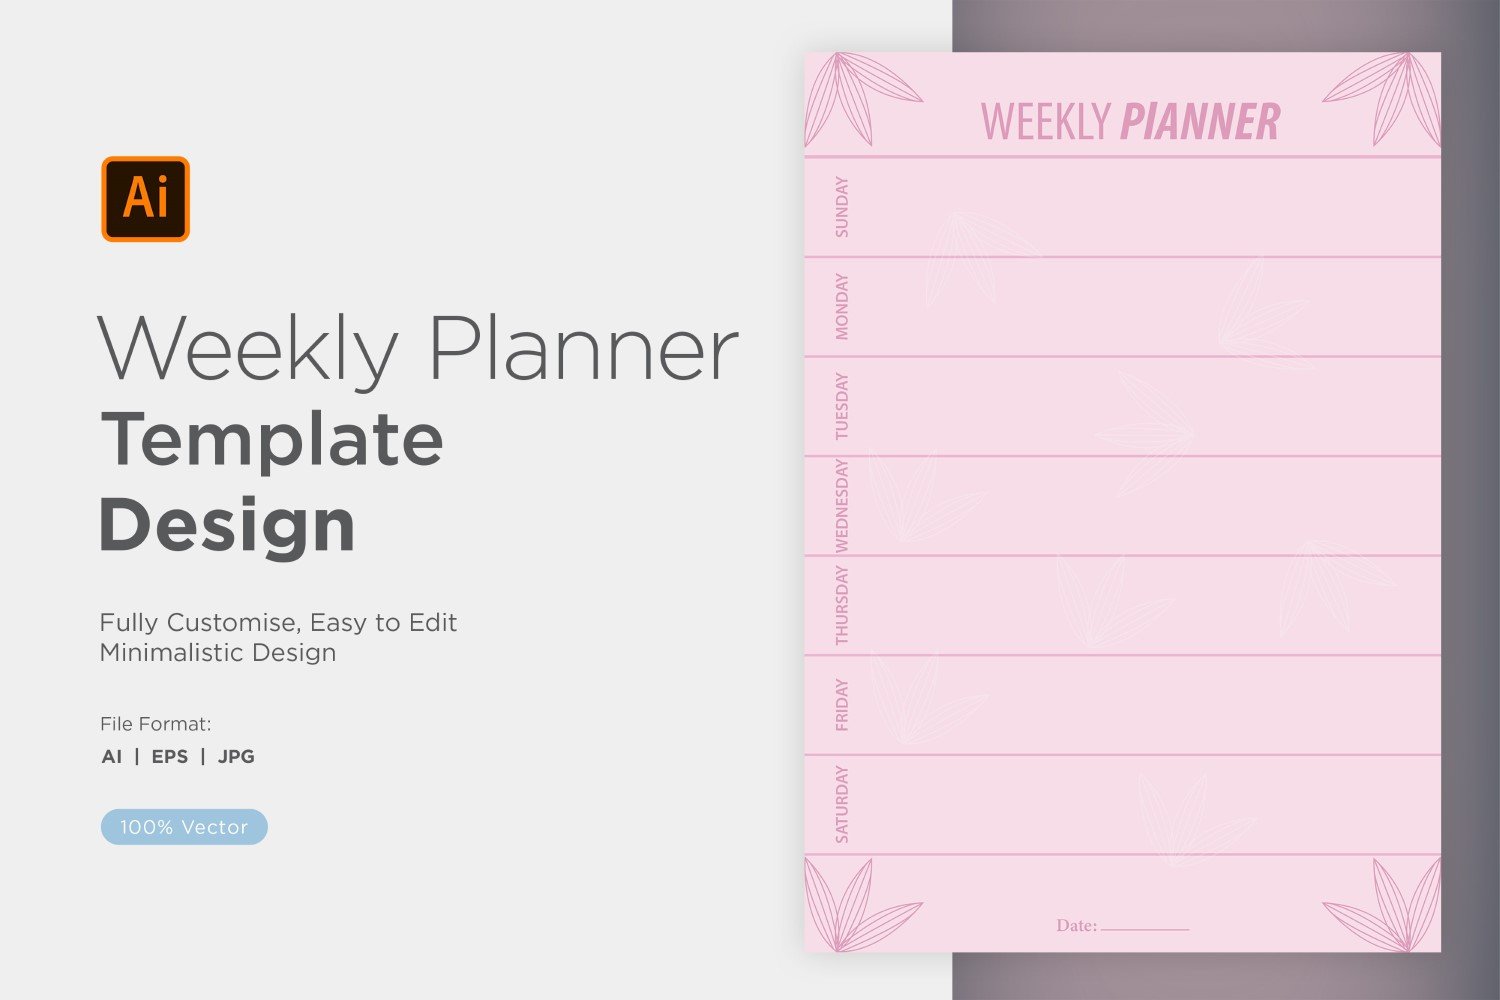 Kit Graphique #357849 Weekly Planner Divers Modles Web - Logo template Preview